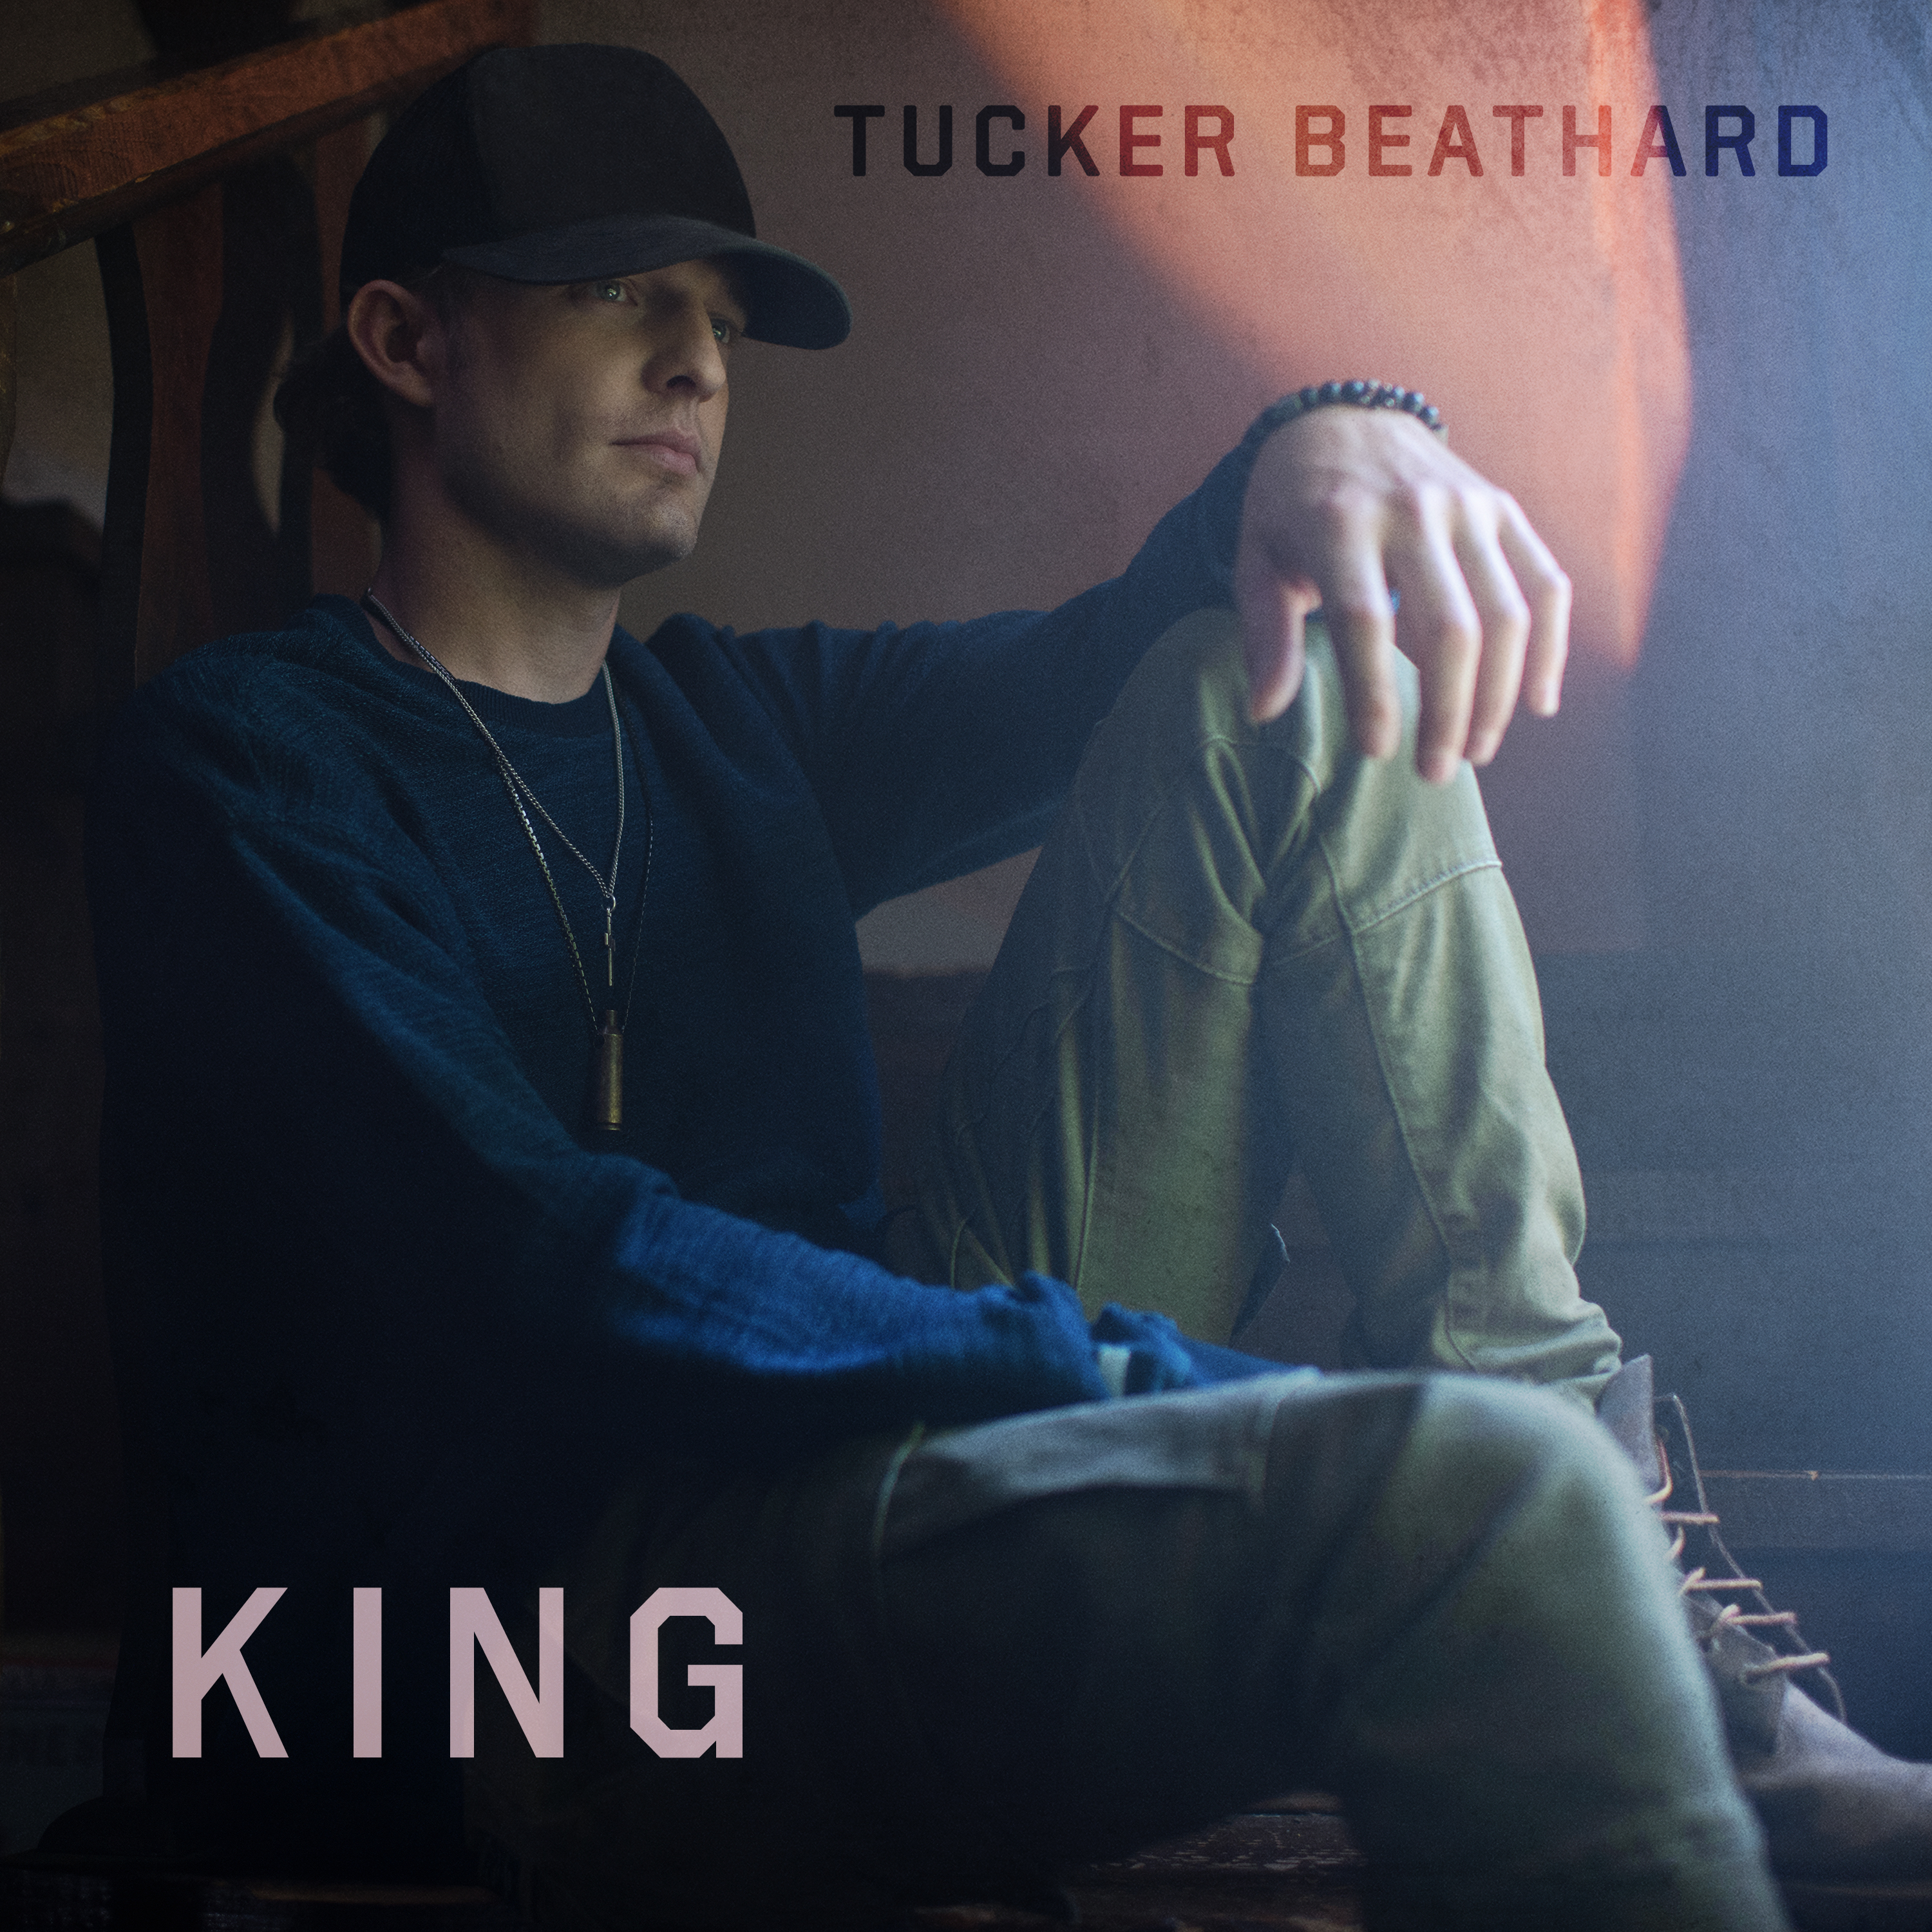 TUCKER BEATHARD FINDS HIS VOICE WITH NEW ALBUM "KING" - AVAILABLE AUGUST 21